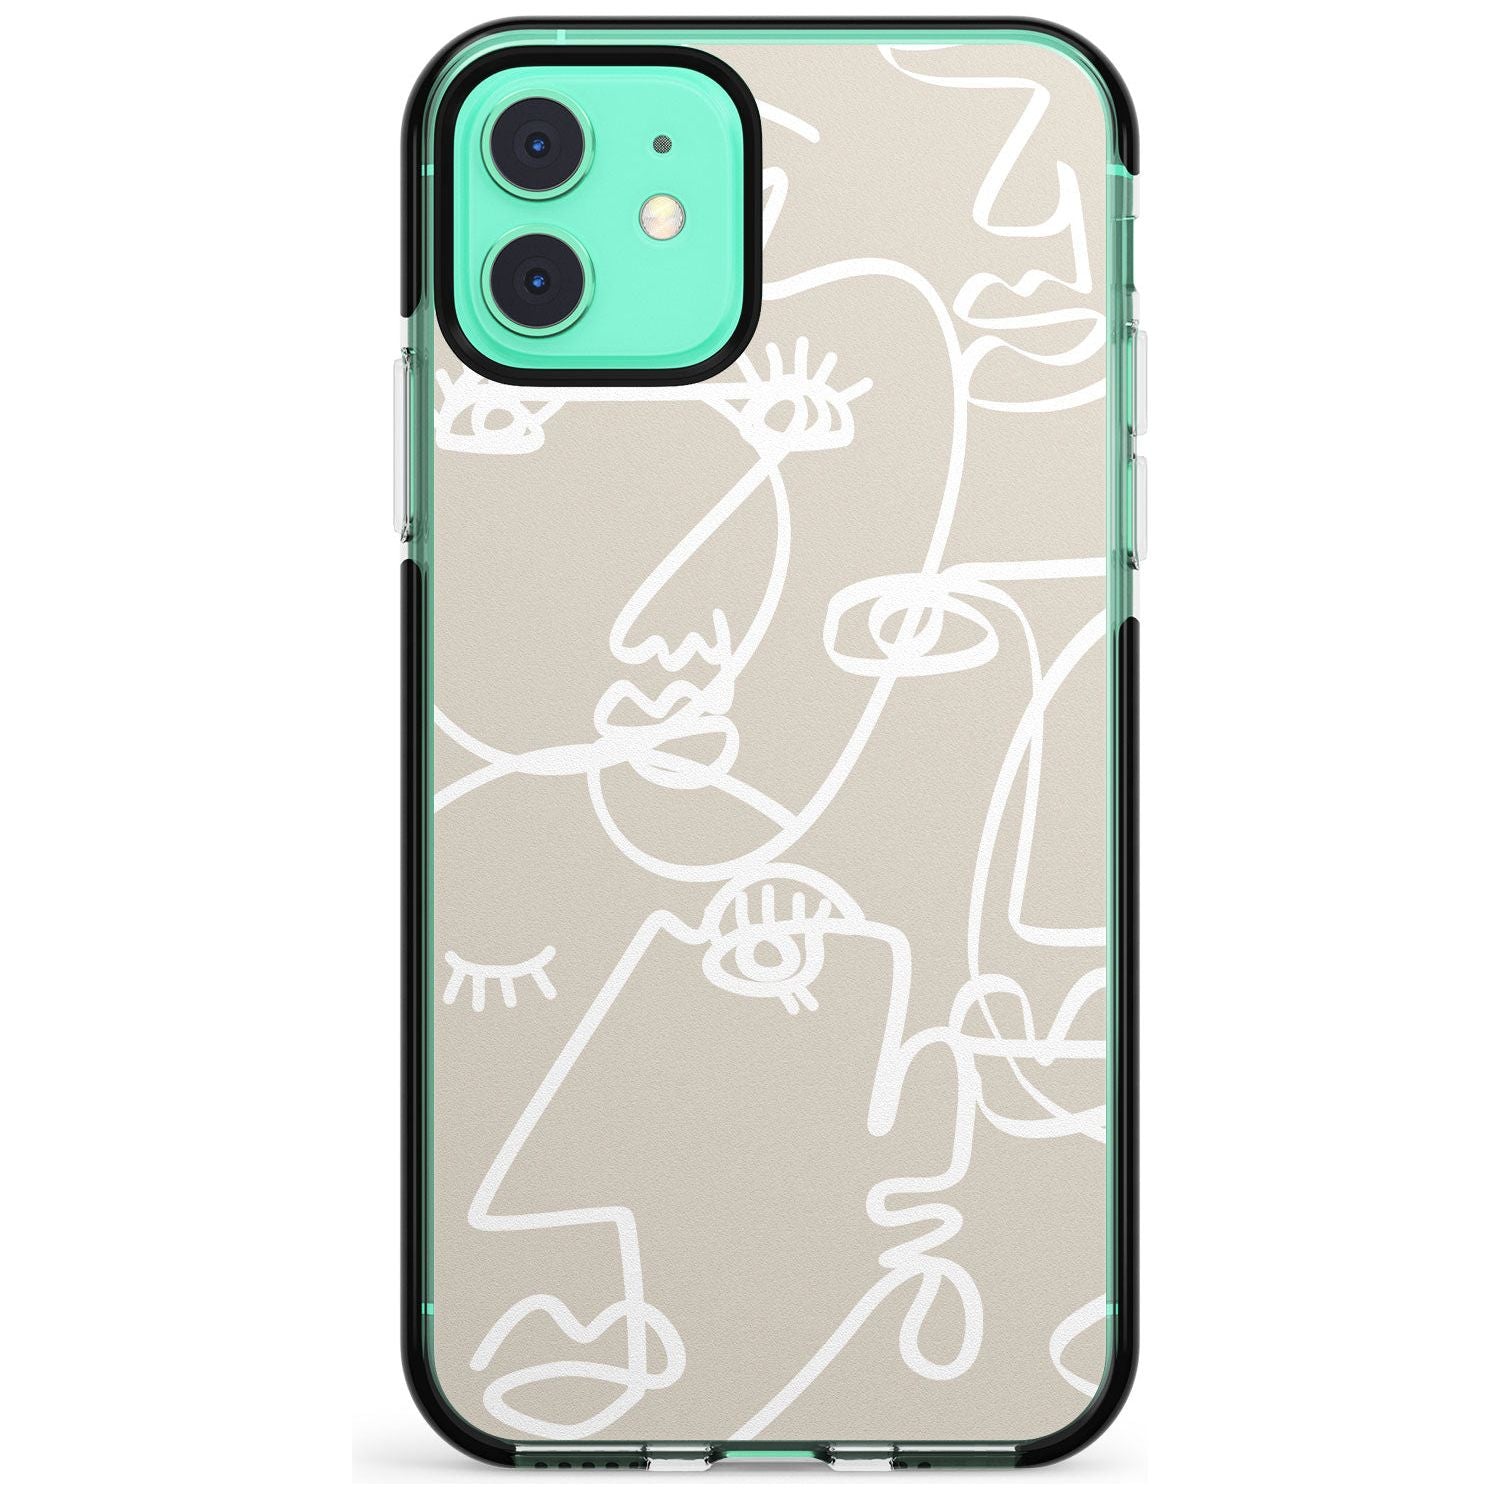 Continuous Line Faces: White on Beige Pink Fade Impact Phone Case for iPhone 11 Pro Max